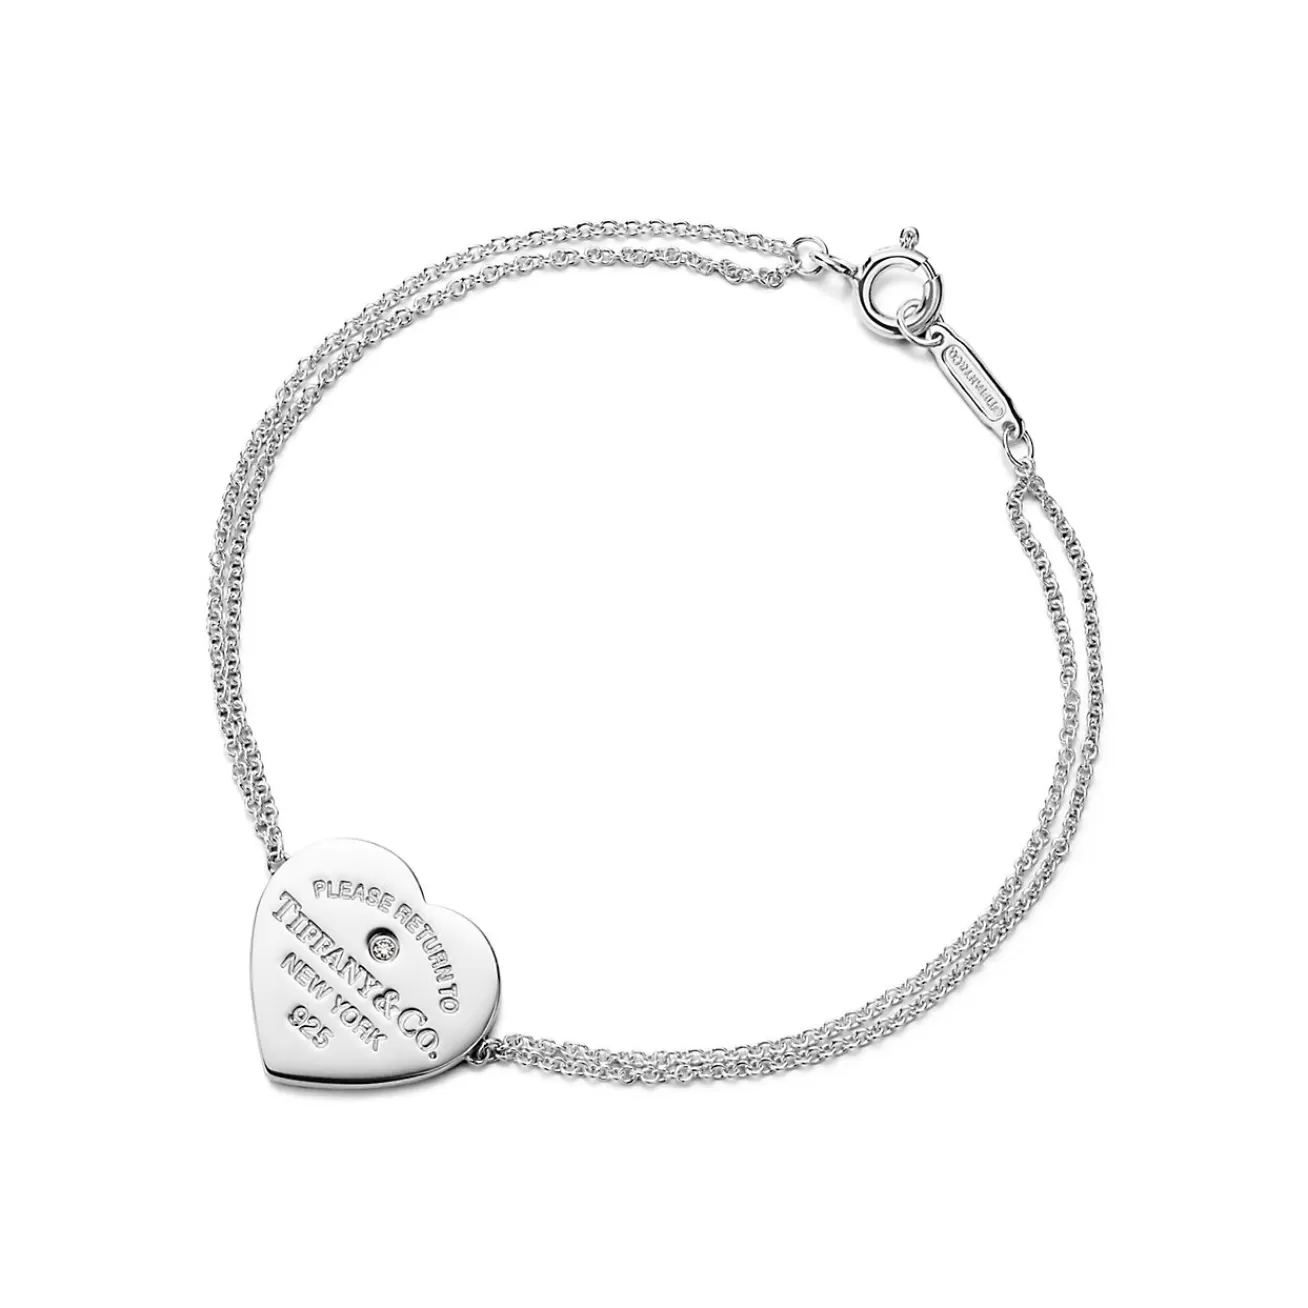 Tiffany & Co. Return to Tiffany® Heart Double Chain Bracelet in Silver with a Diamond, Small | ^ Bracelets | Sterling Silver Jewelry